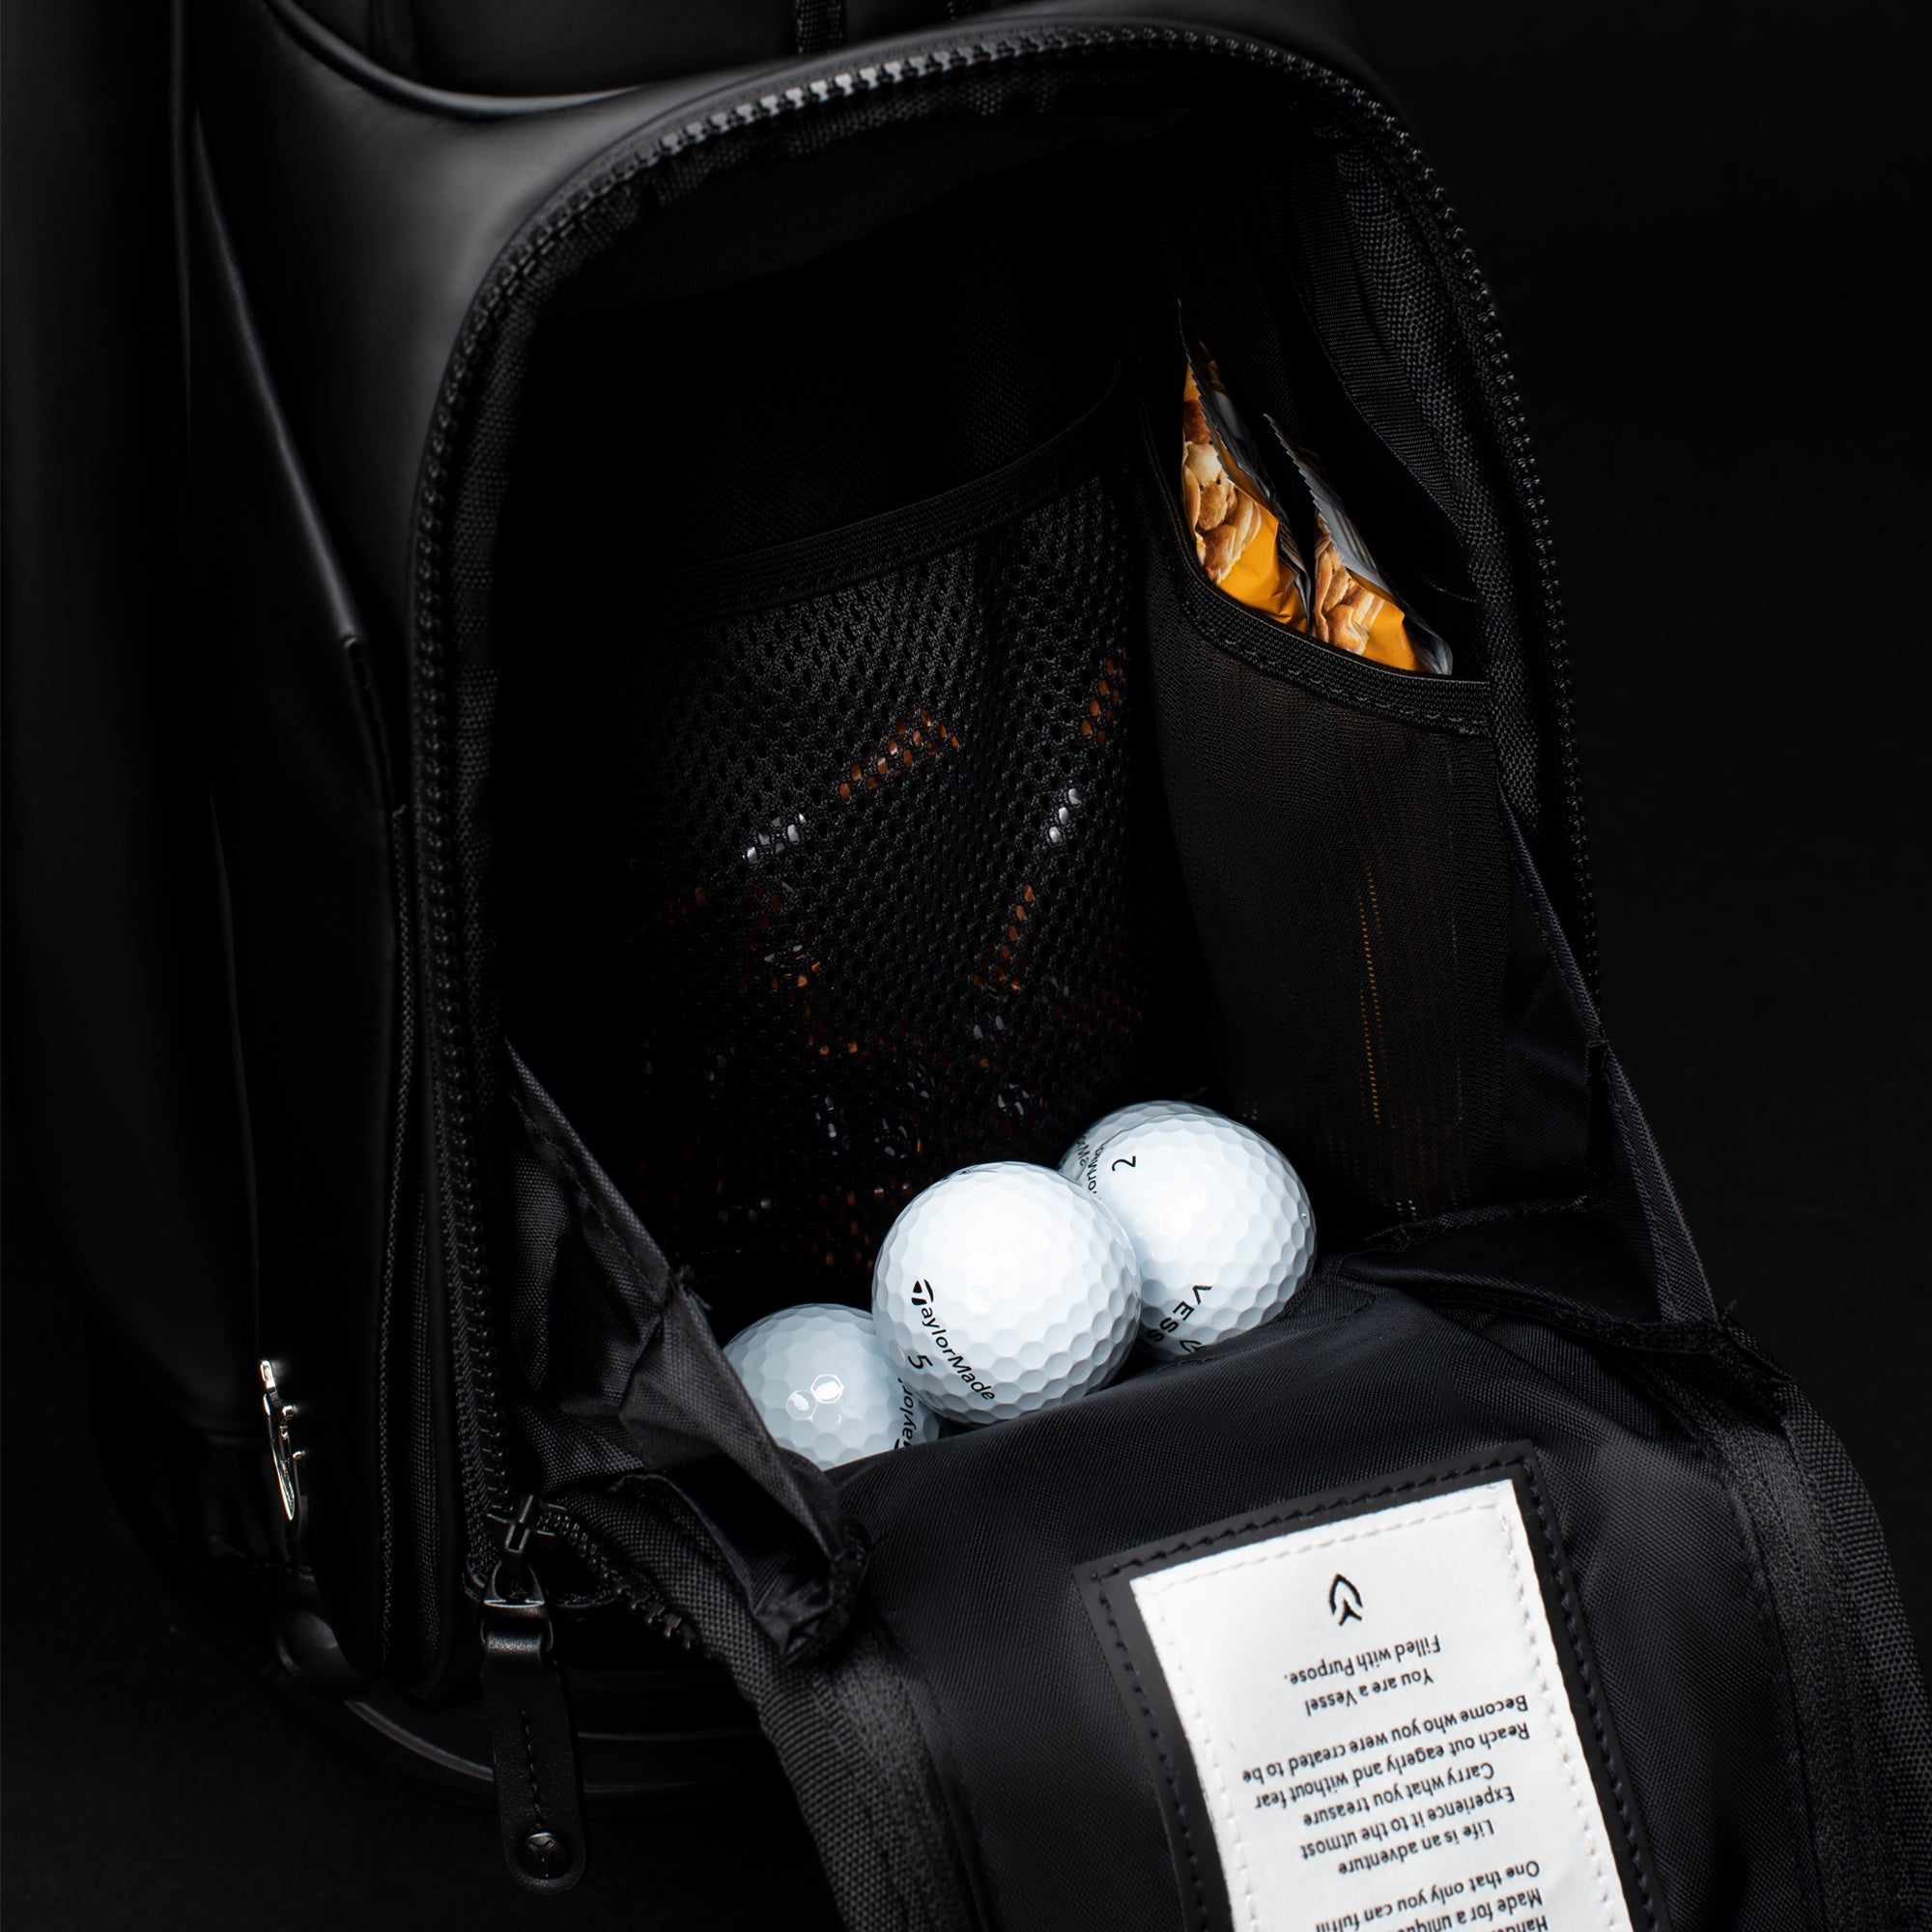 Close up of golf bag ball pocket with snacks and golf balls